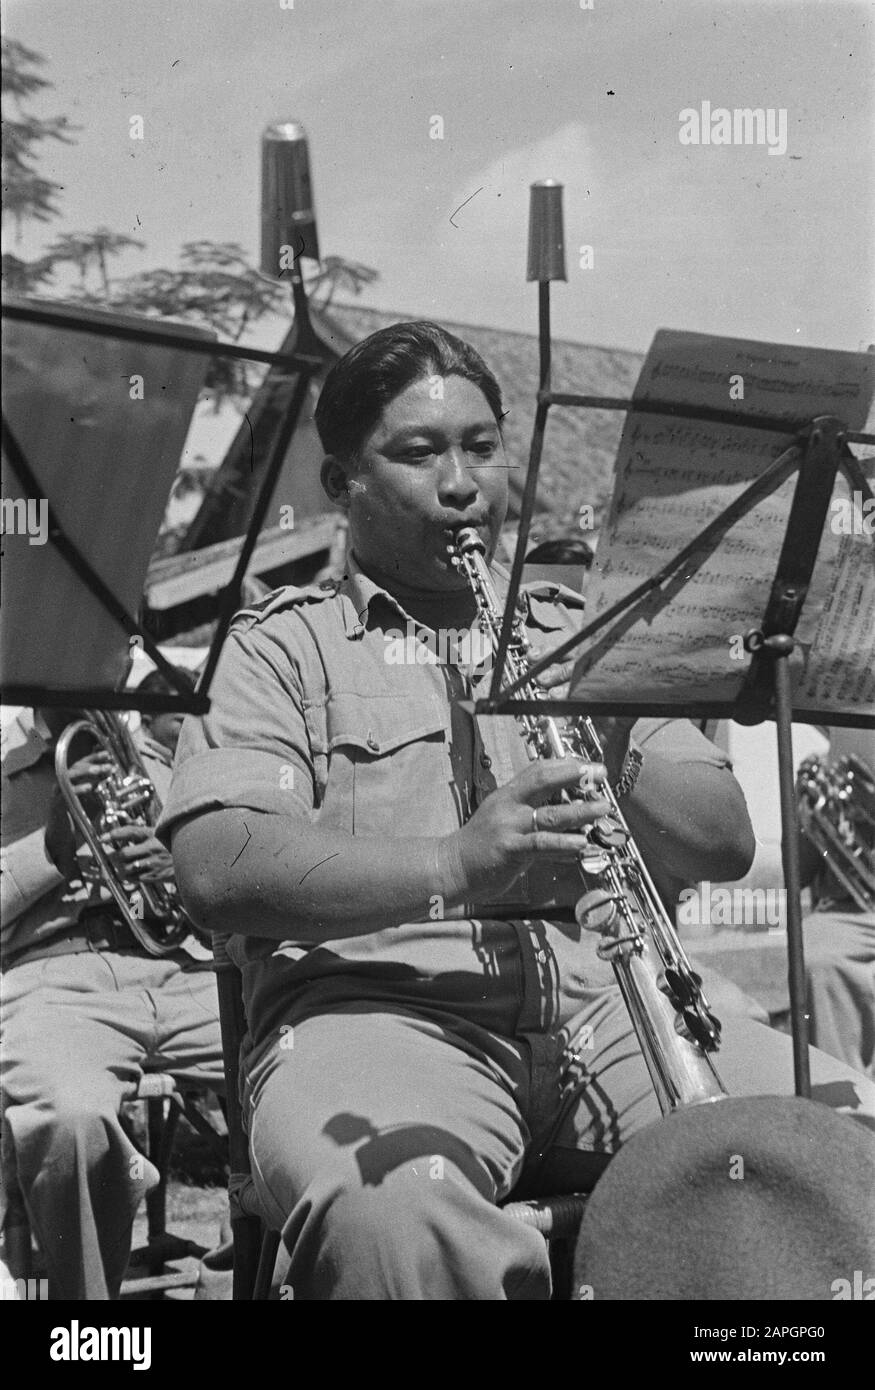 Staff music KNIL Description: [Concert Staff Music KNIL] [clarinettist] Date: May 1947 Location: Indonesia, Dutch East Indies Stock Photo